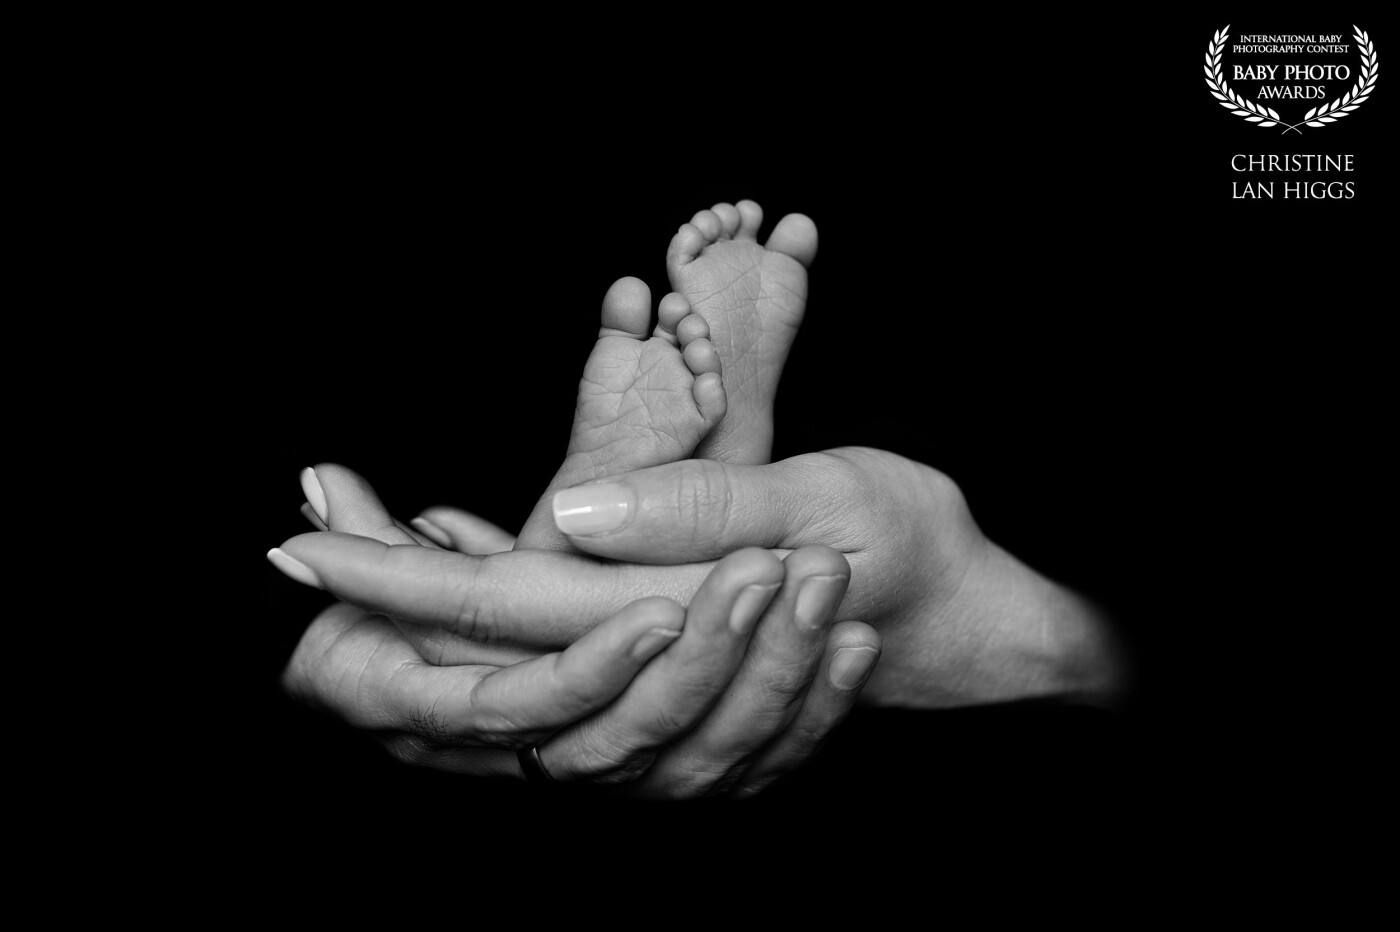 This is the parents first child and it’s a girl! The hands of the parents lovingly embrace each other and show off the dainty feet of their precious baby.